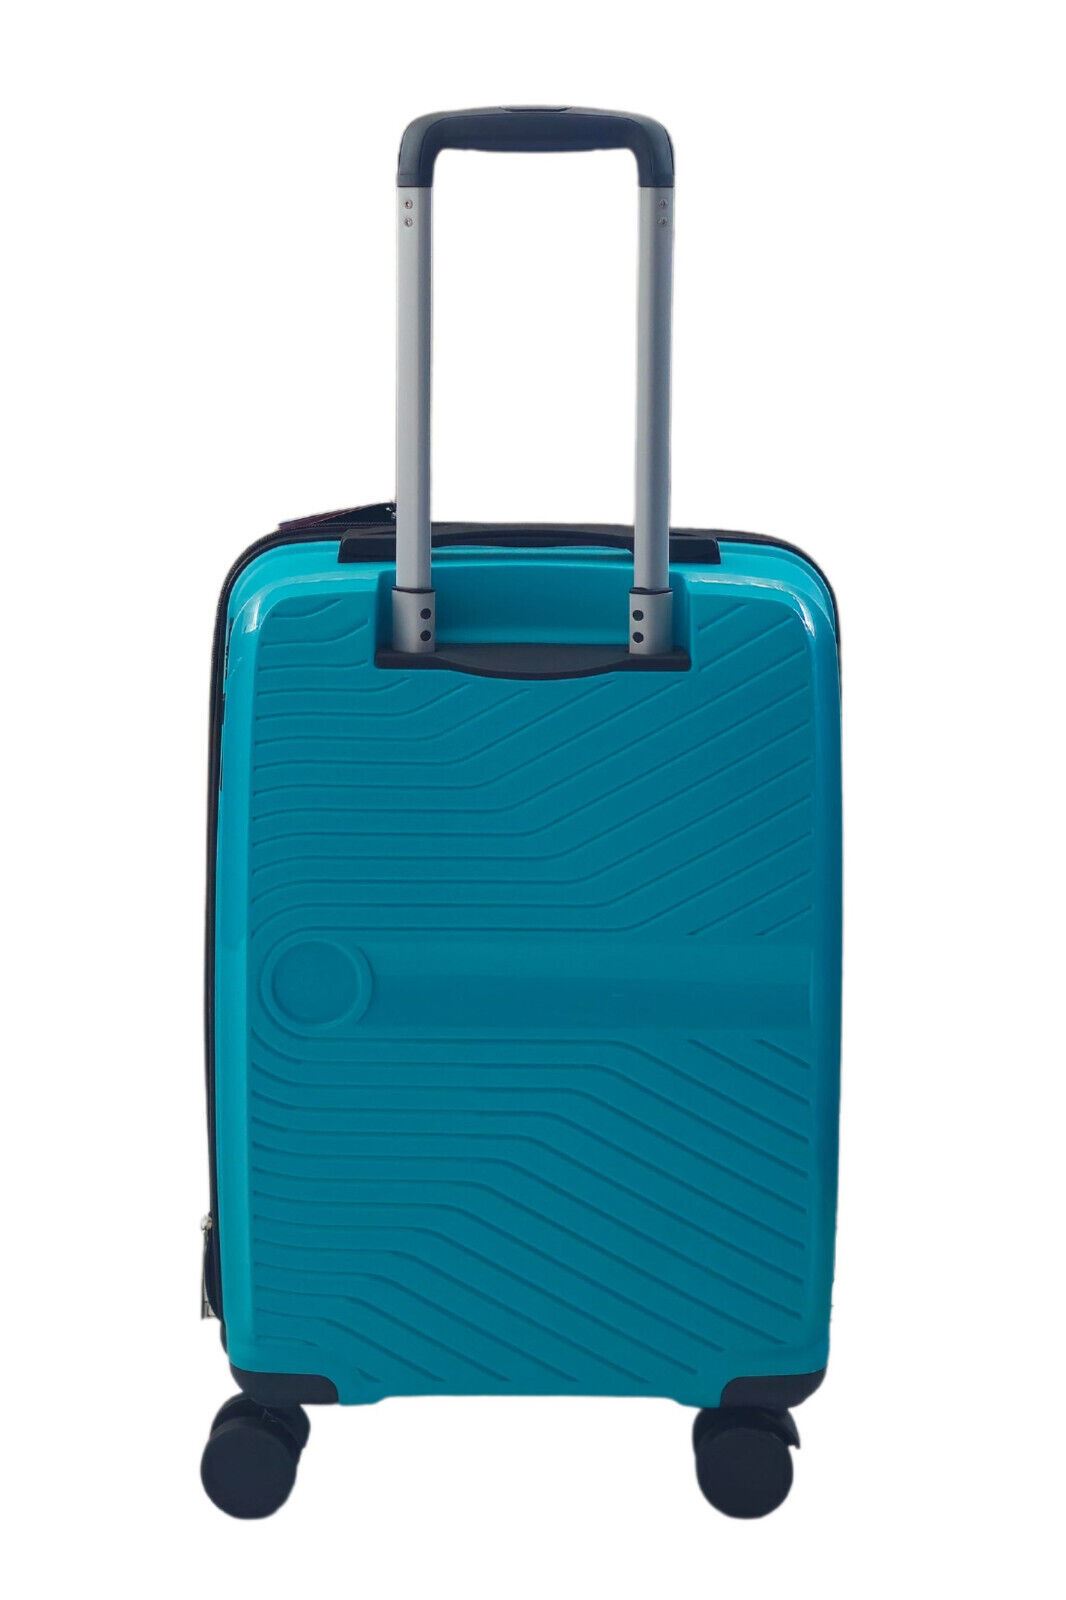 Abbeville Cabin Hard Shell Suitcase in Mint